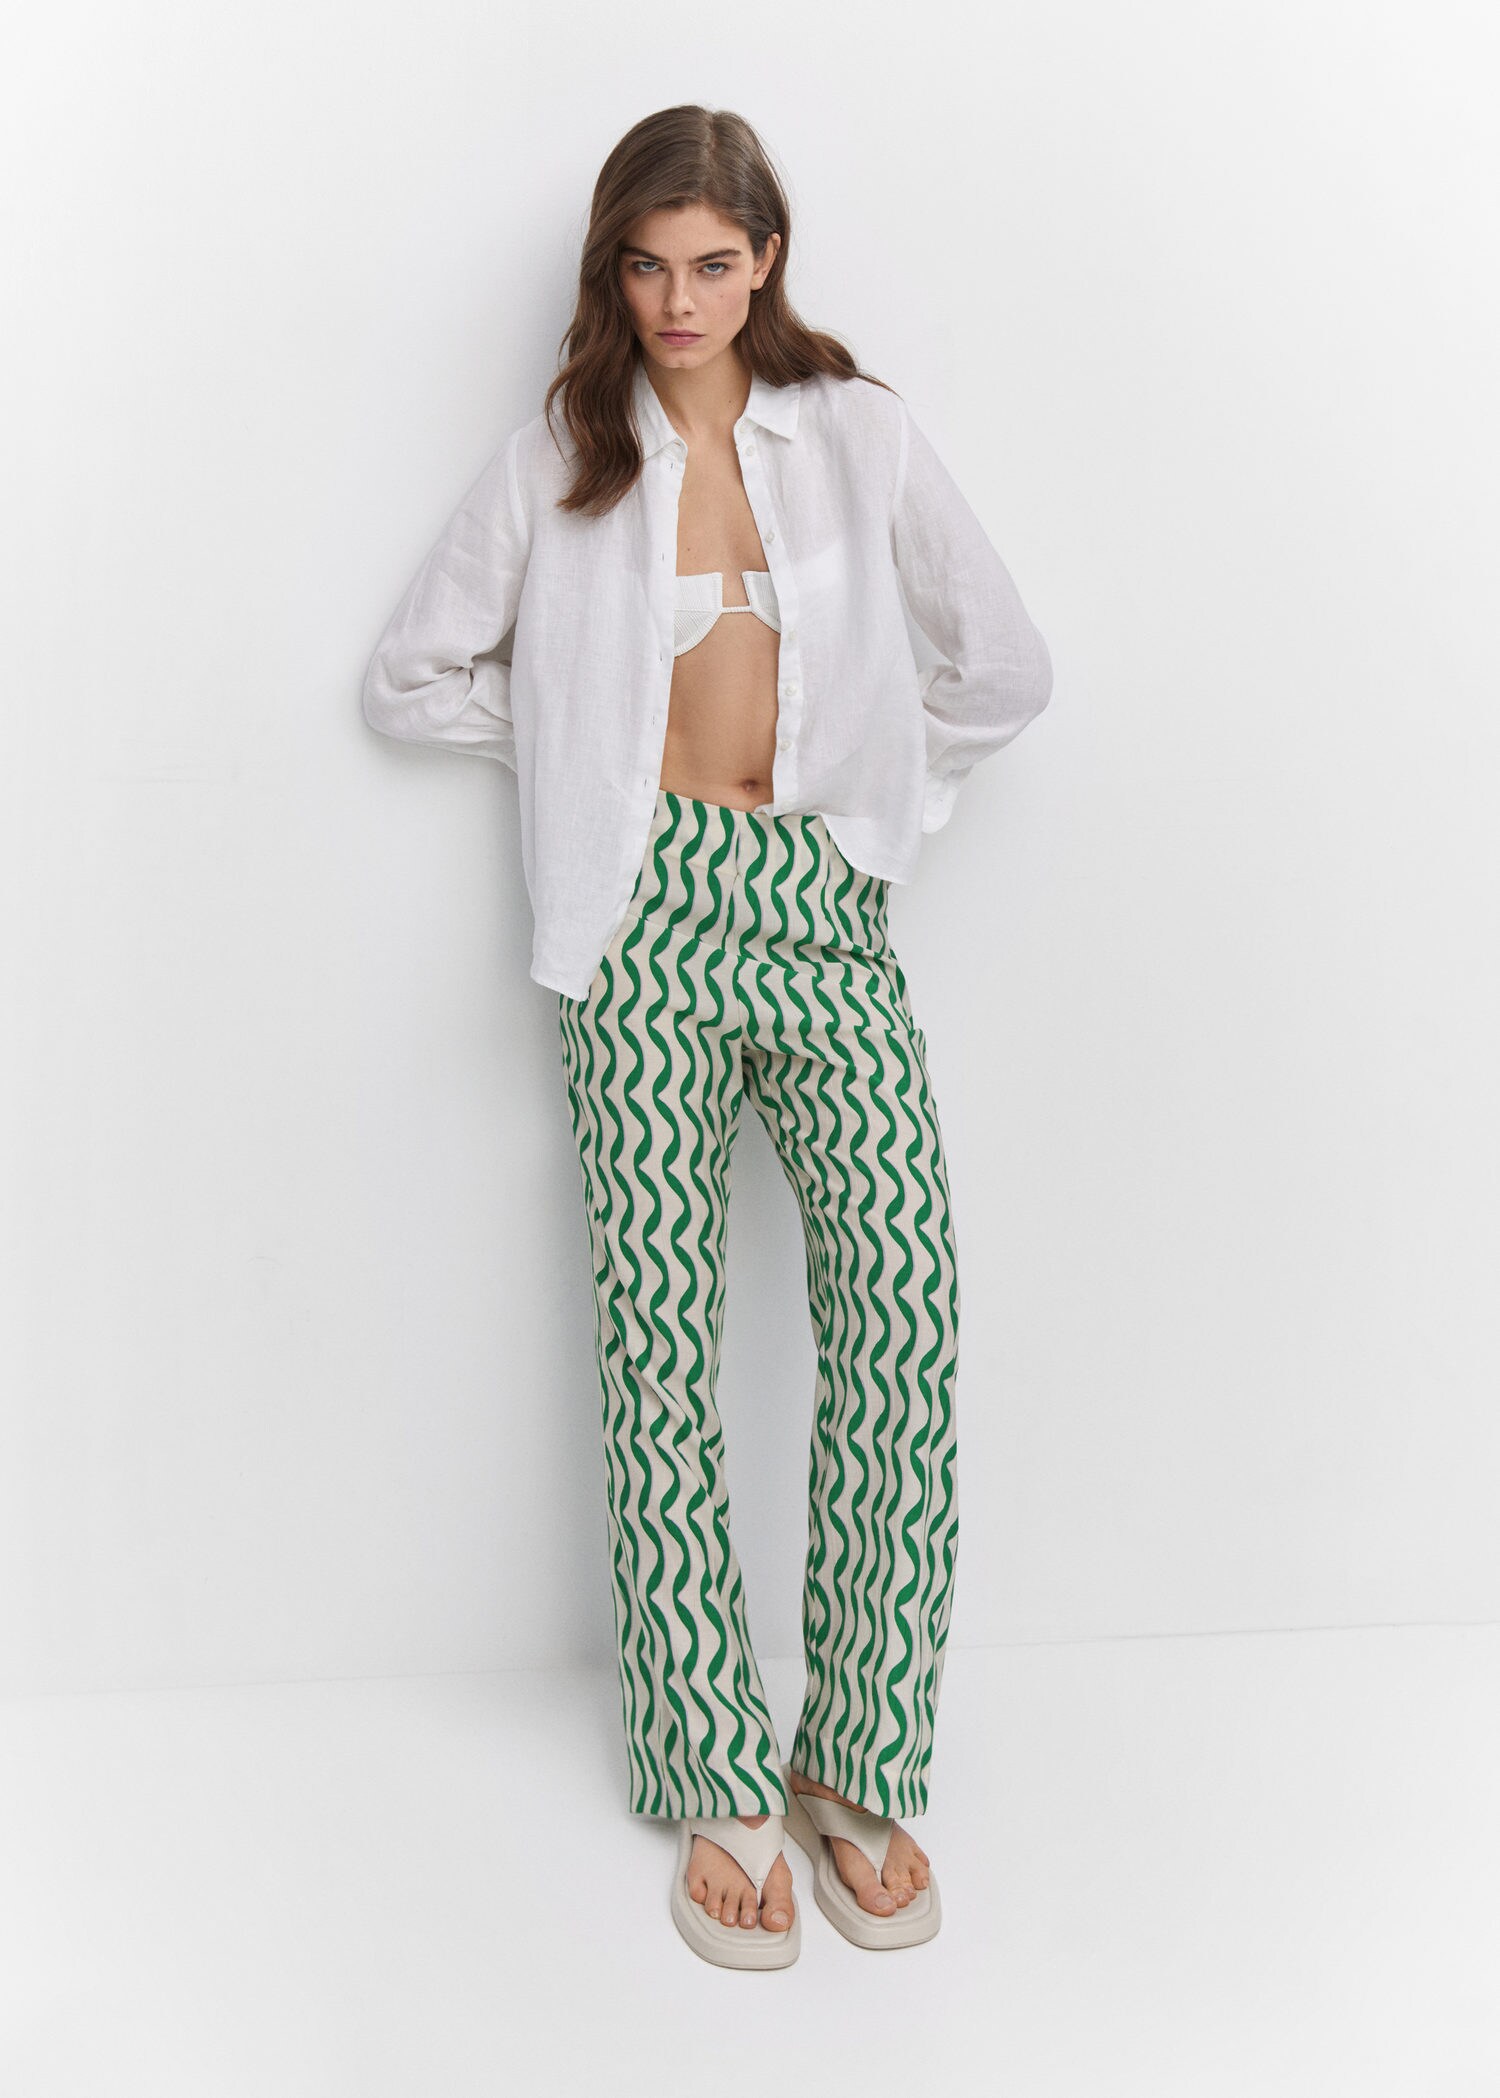 Textured printed trousers